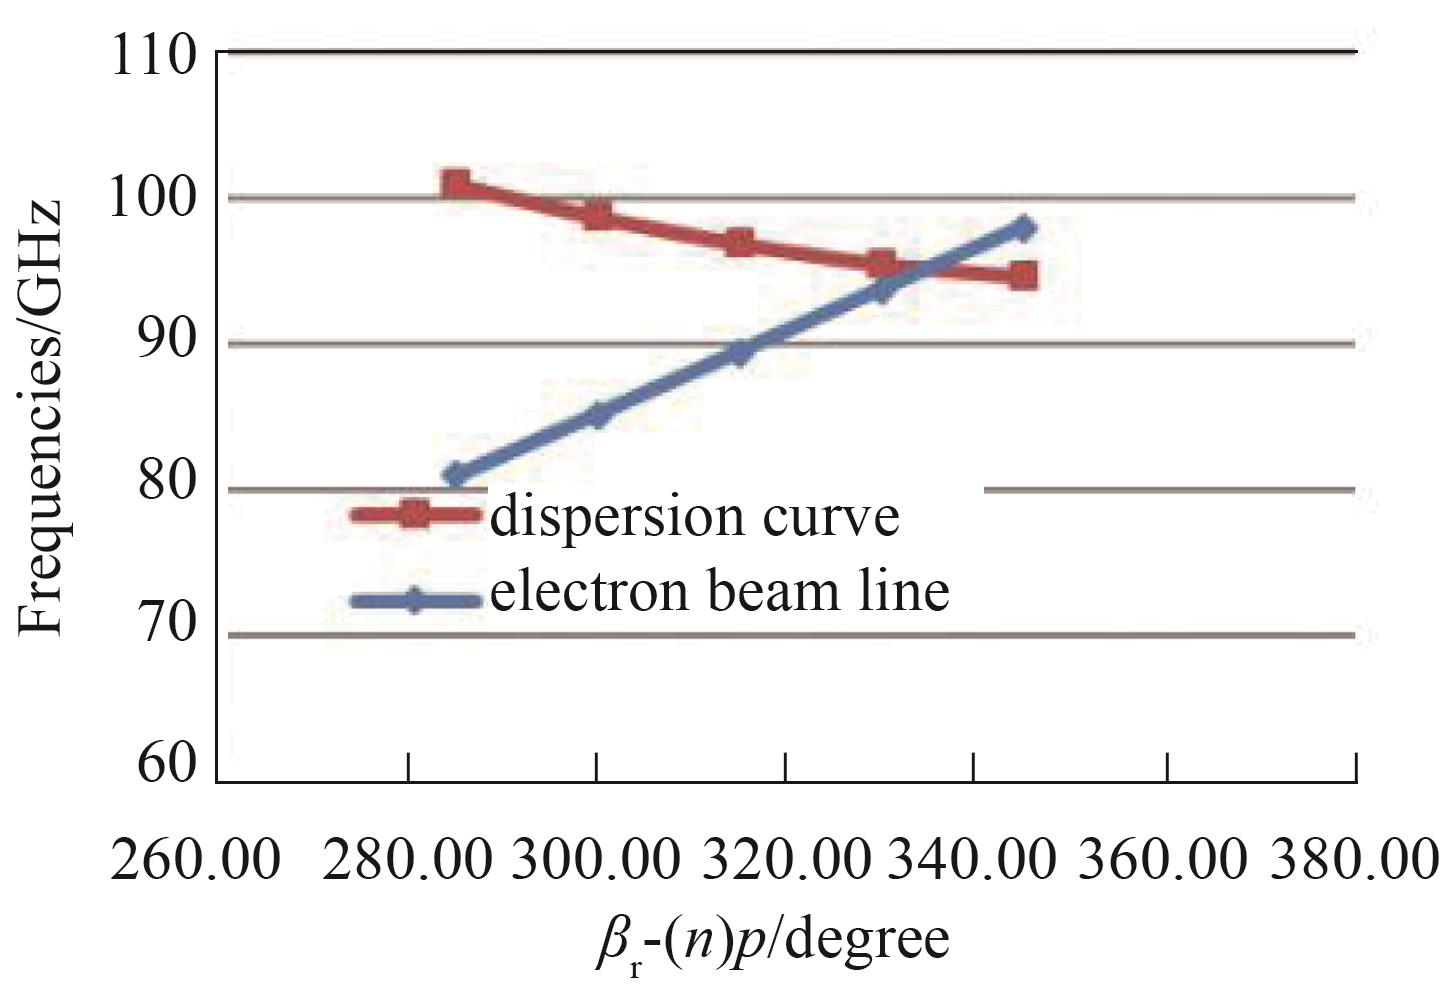 Dispersion curve of even period resonant cavity and 19 kV electron beam line